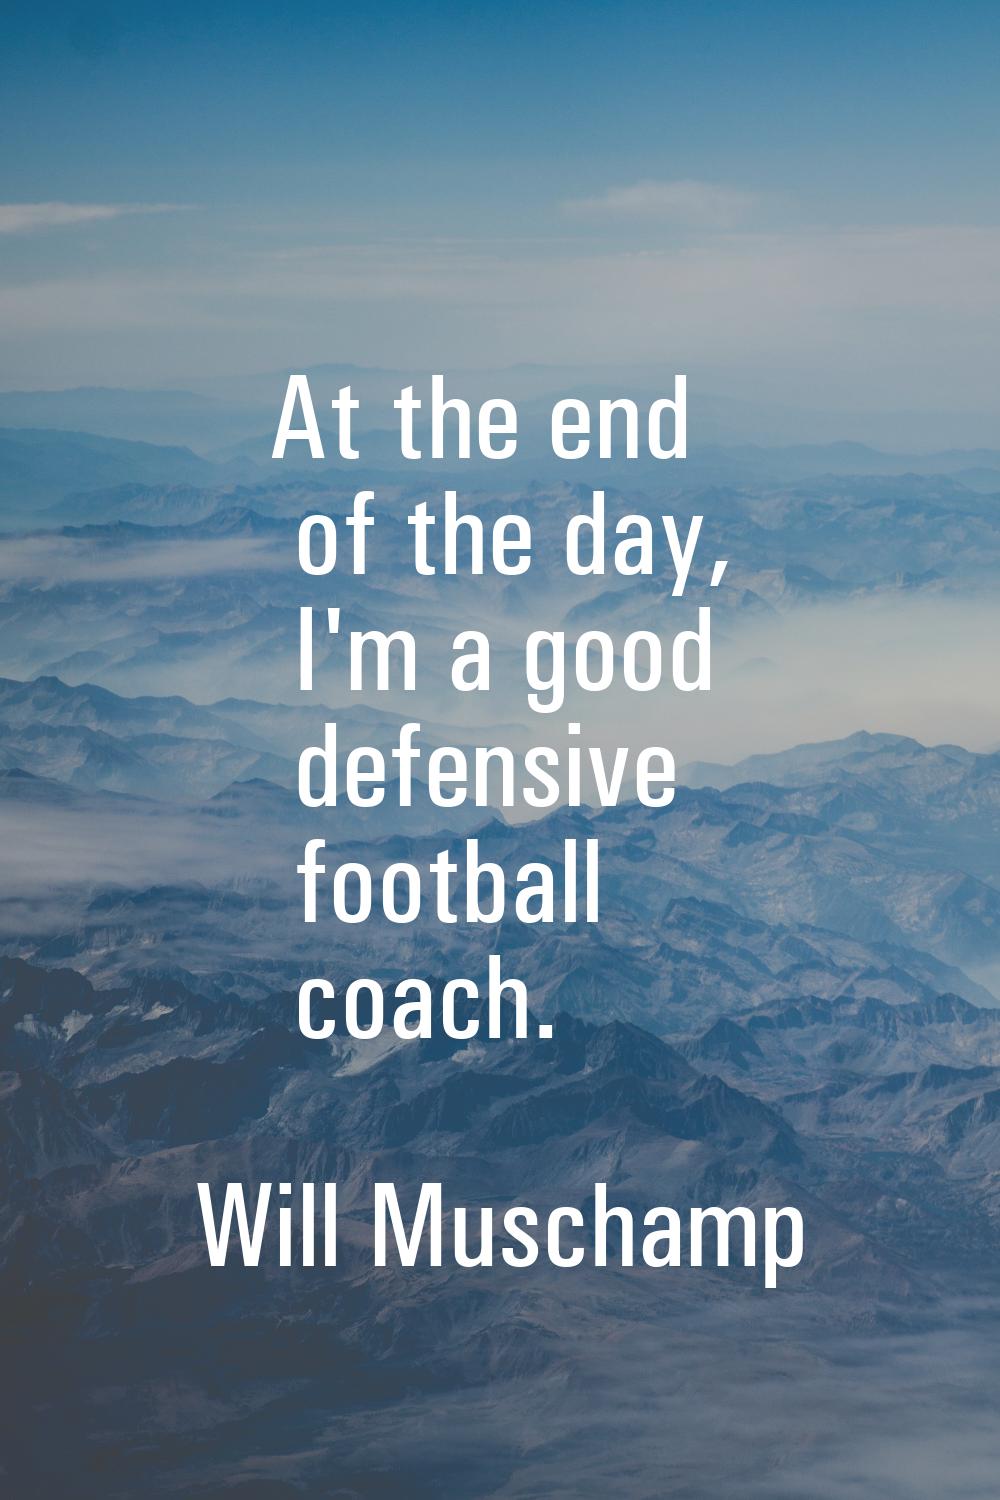 At the end of the day, I'm a good defensive football coach.